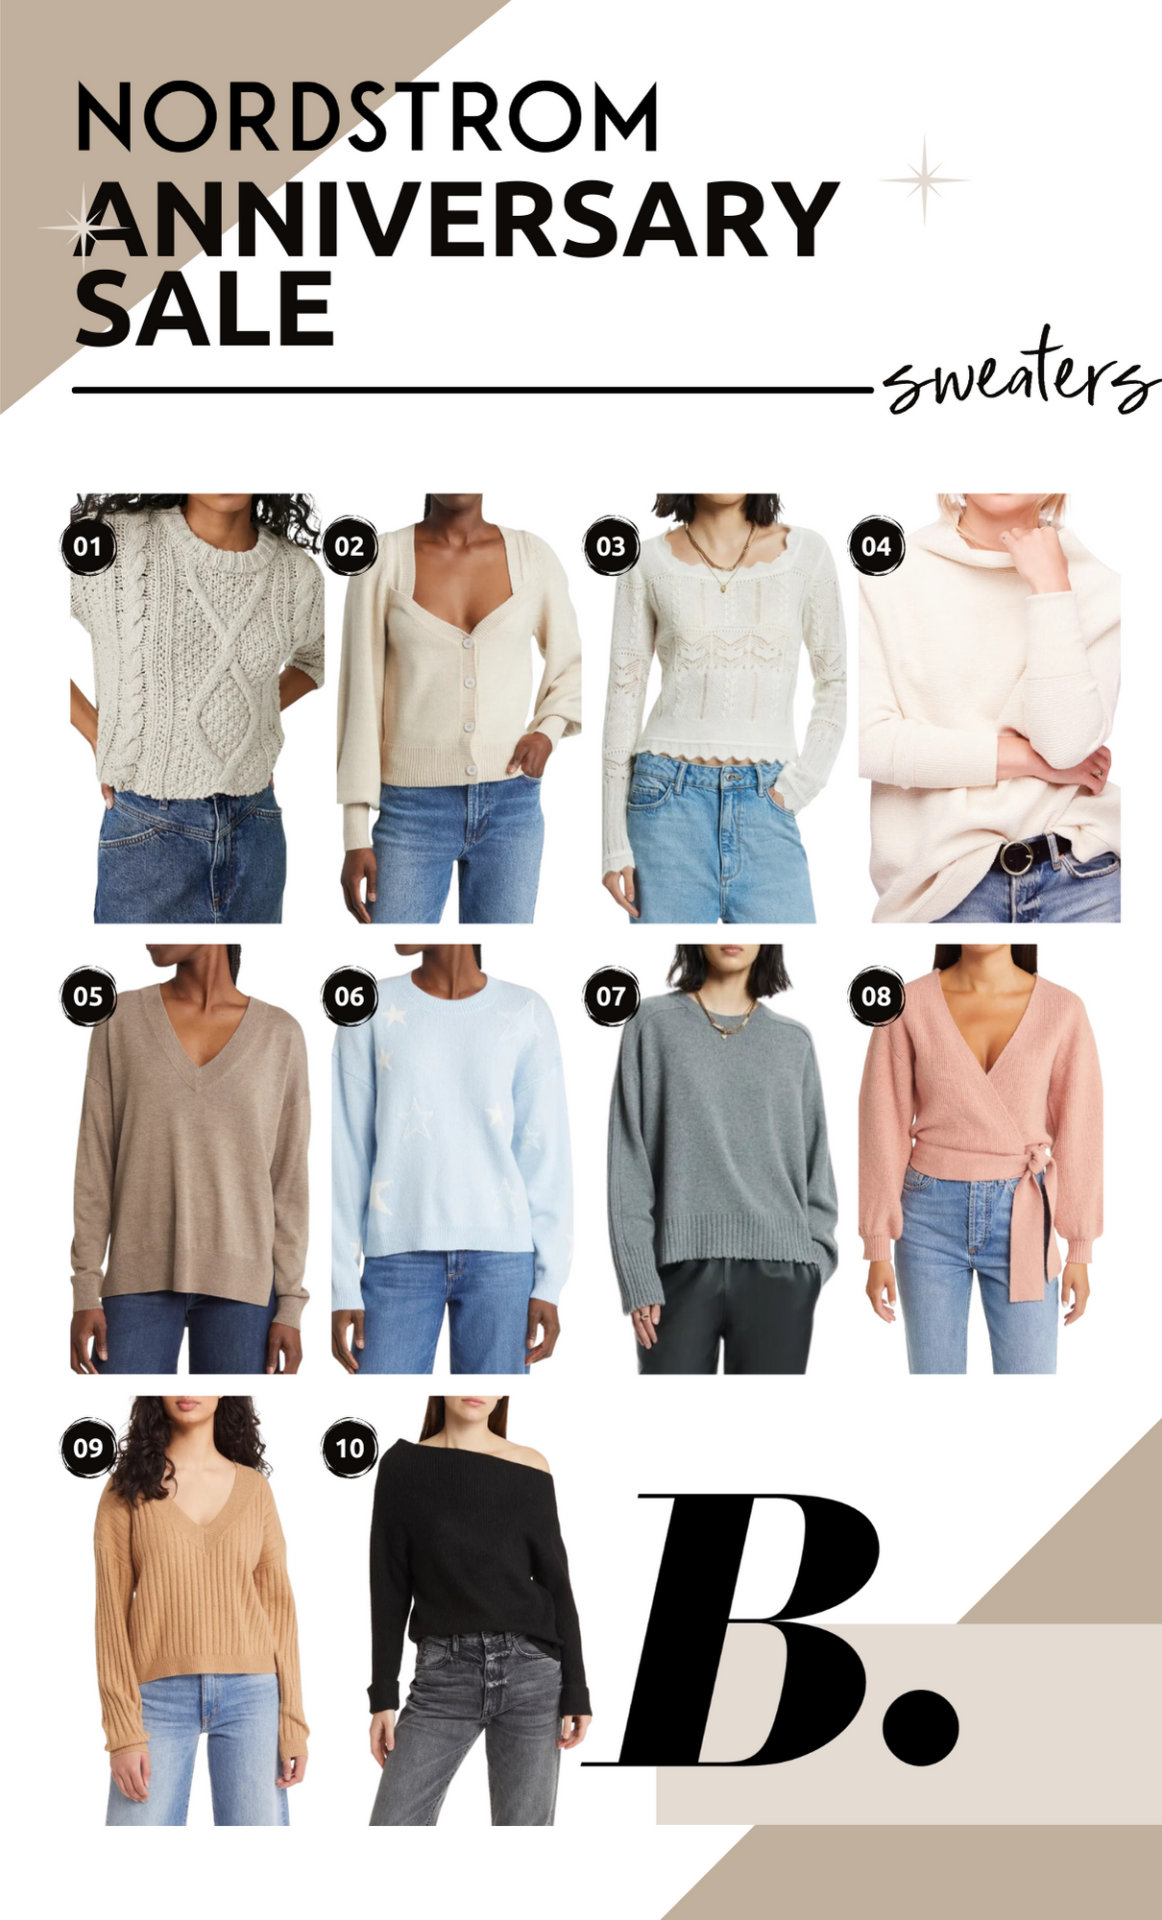 Nordstrom anniversary sale sweaters, nordstrom anniversary sale, nordstrom sale, nordstrom anniversary sale 2023, what to buy nordstrom sale, nsale, nsale 2023, best sweaters, affordable sweaters, designer sweaters, sweaters on sale, best sweaters on sale